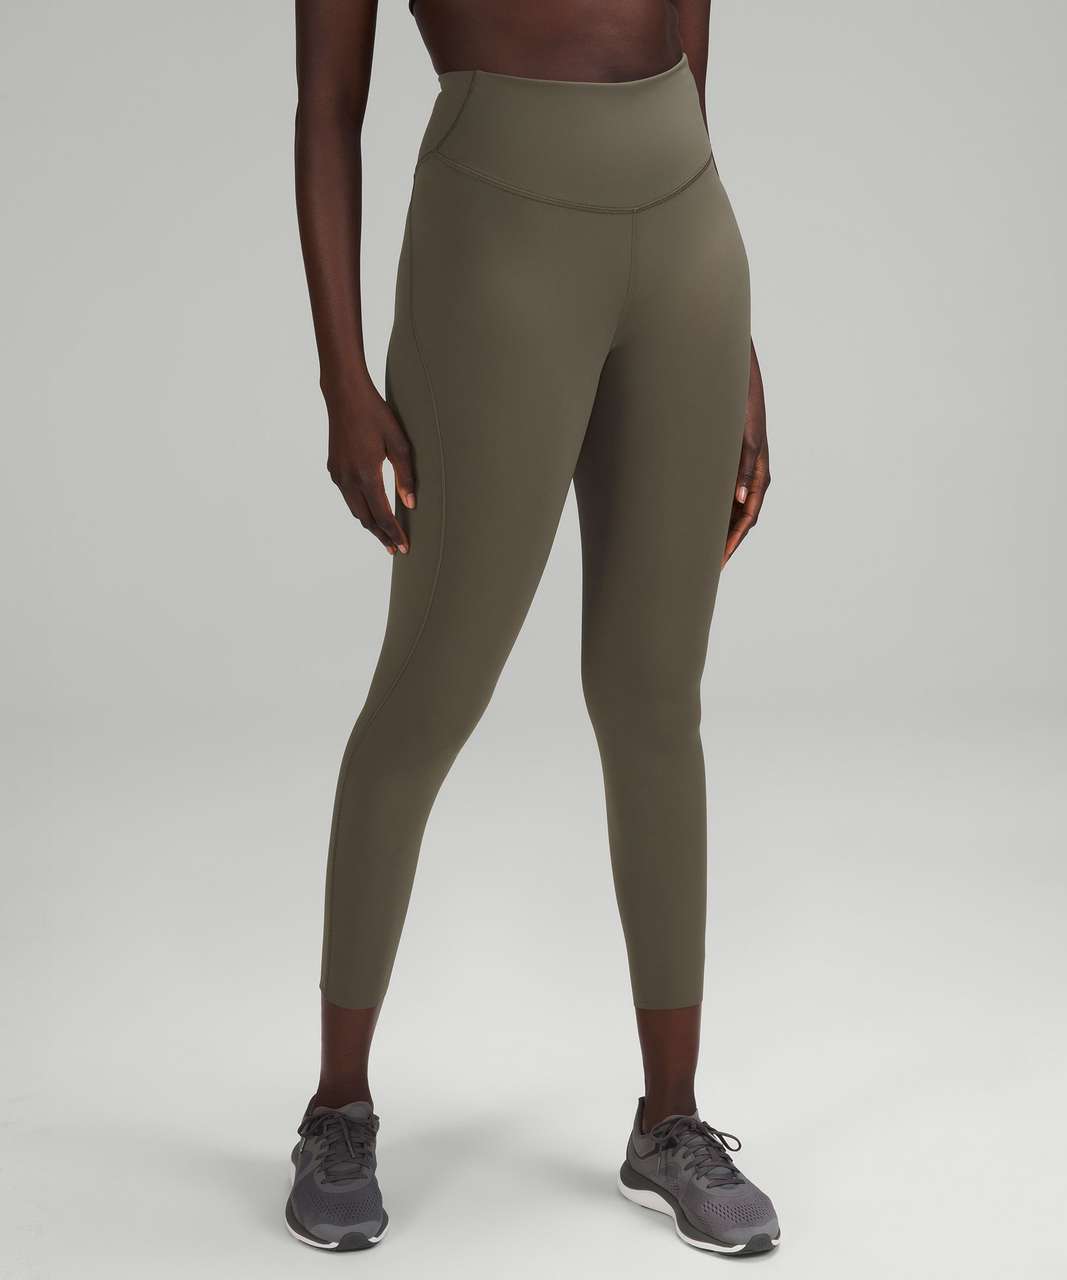 Lululemon Base Pace High-Rise Running Tight 25" - Army Green